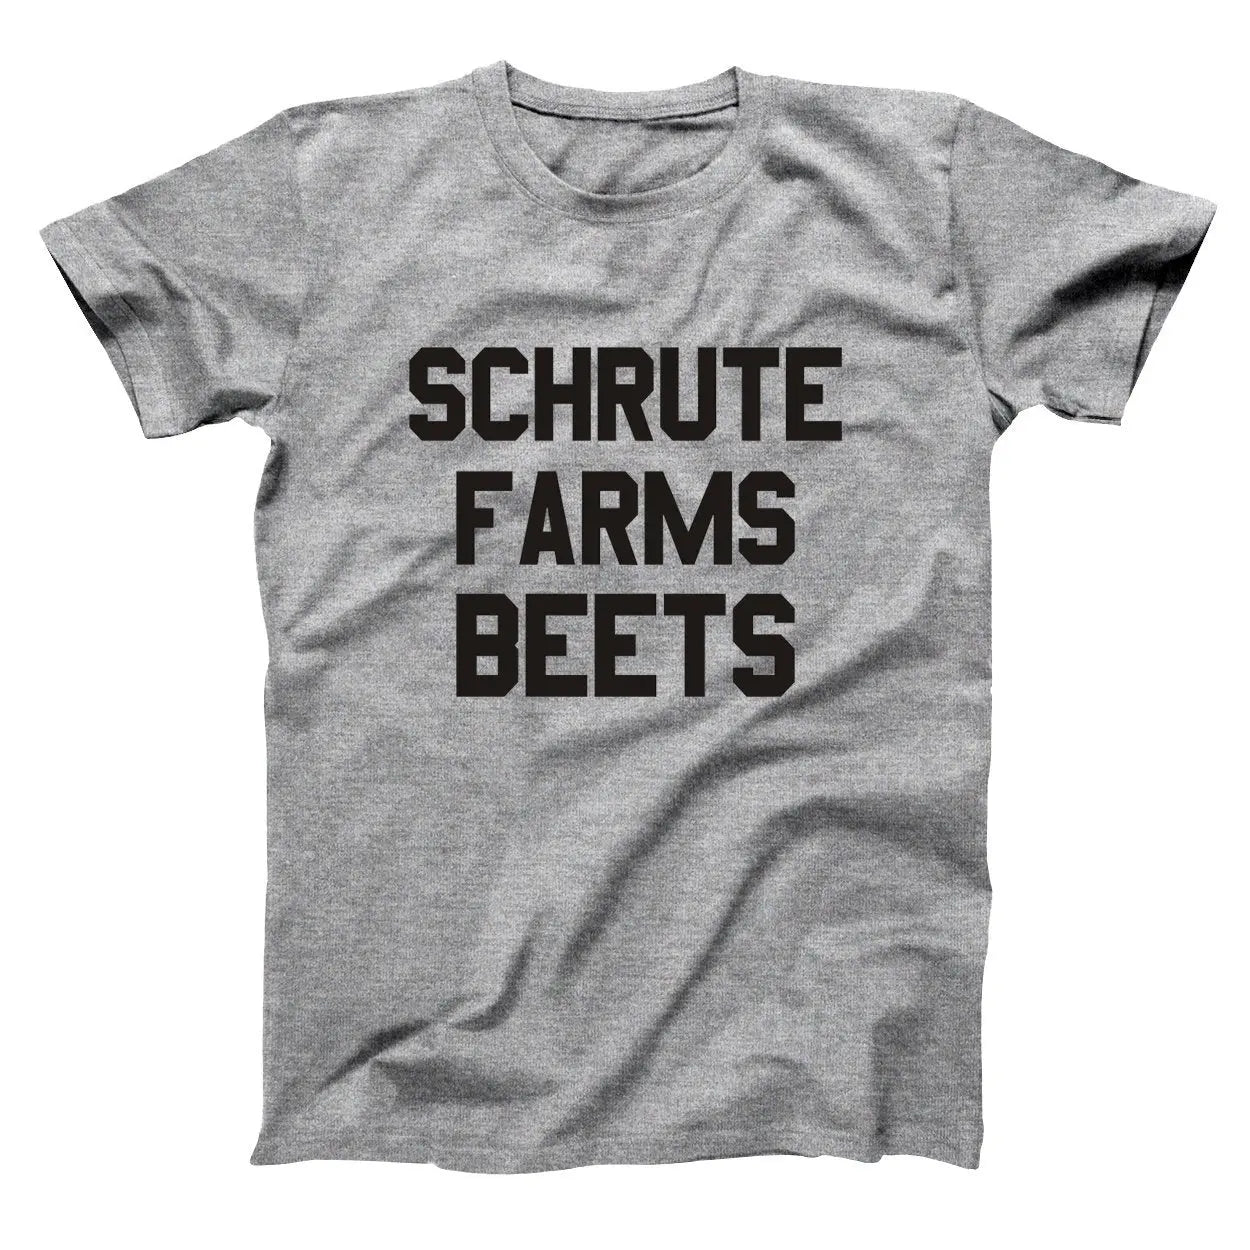 Schrute Farms Beets Tshirt - Donkey Tees